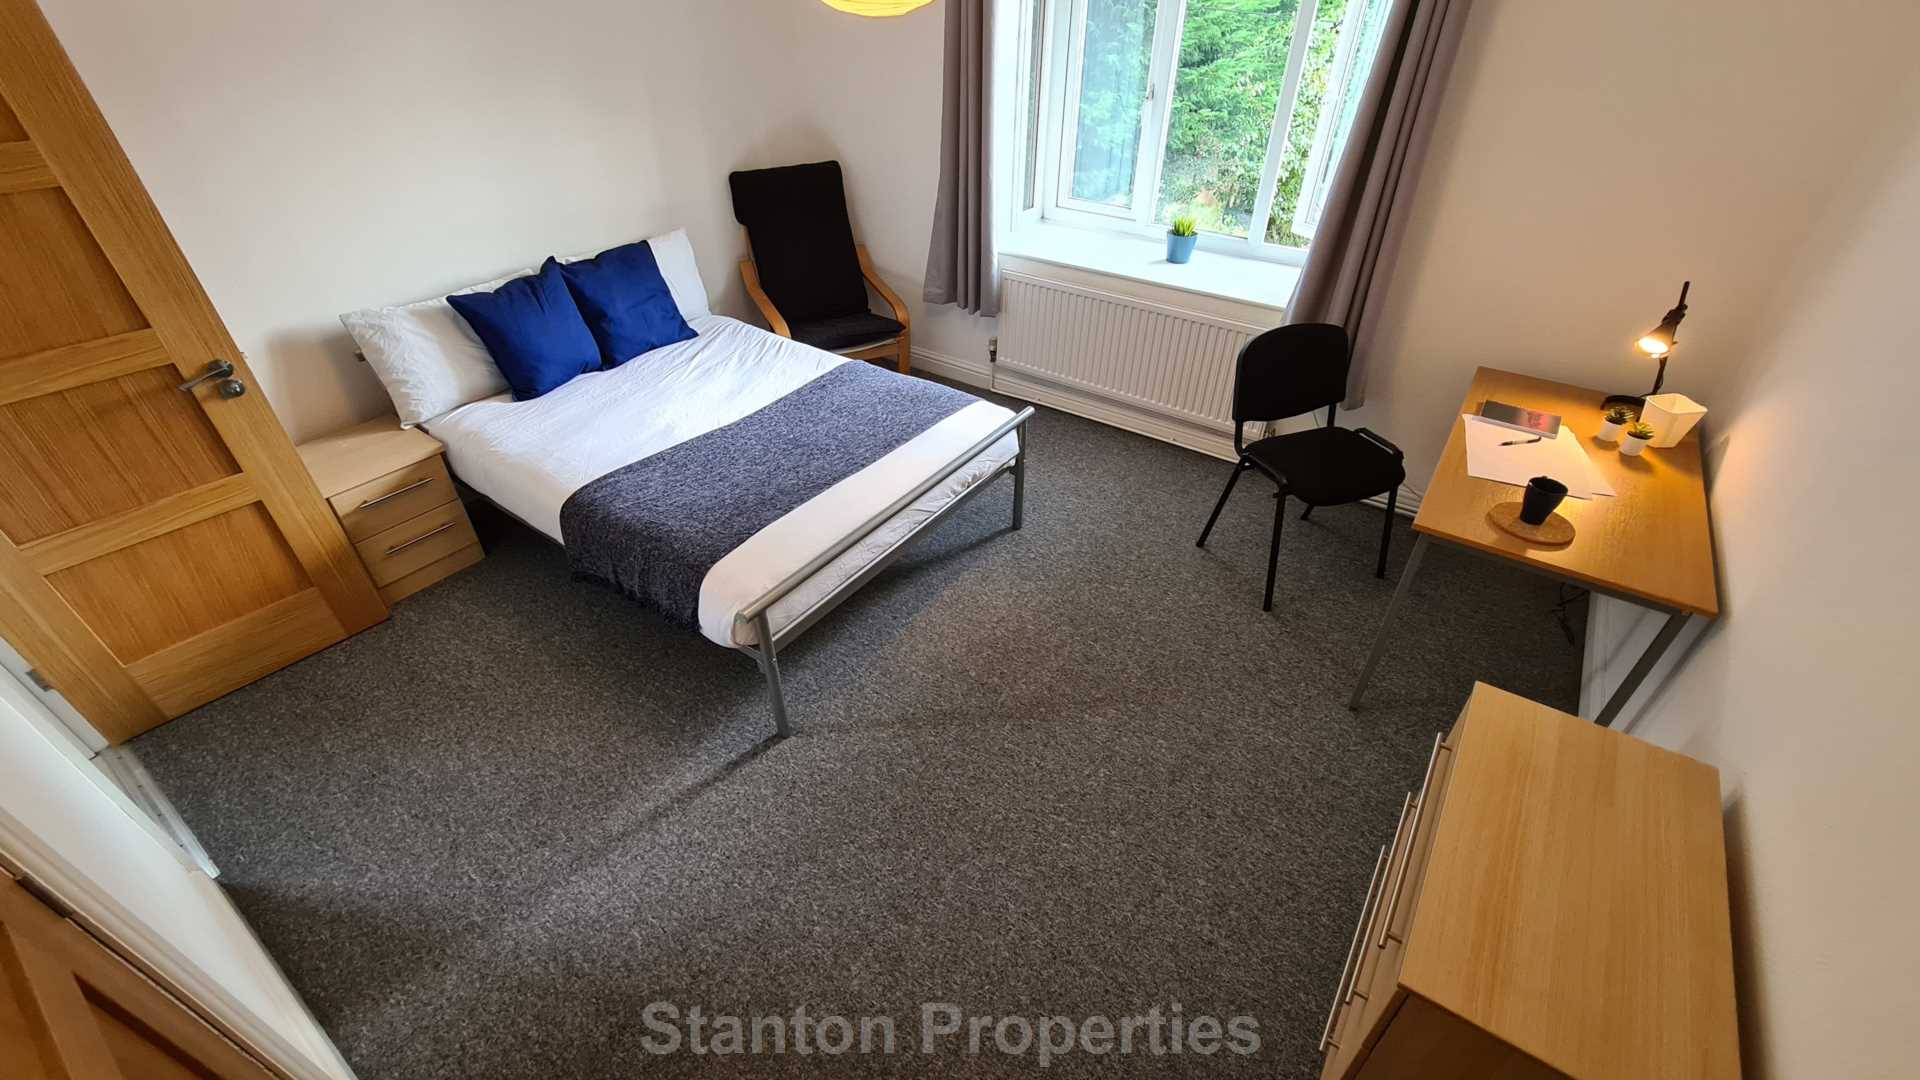 £155 pppw, See Video Tour, Granville Road, Fallowfield, Image 14